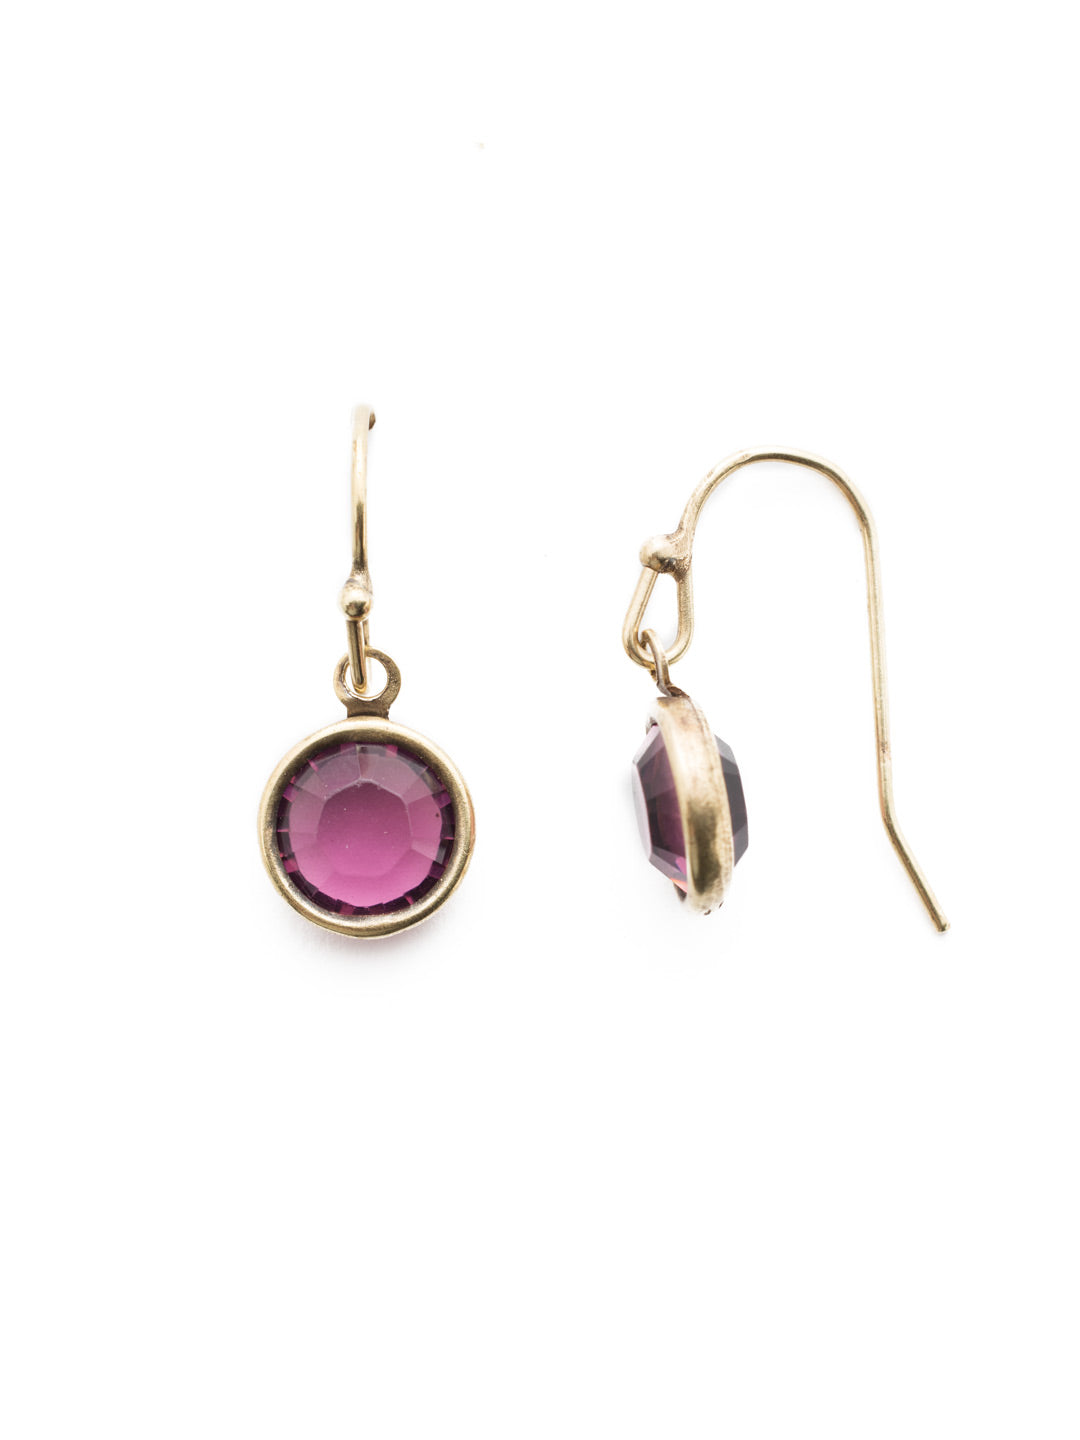 Dewdrop Dangle Earring - EEF73AGDCS - A drop of sparkle is always in style. Add a touch with this pair of drop earrings. From Sorrelli's Duchess collection in our Antique Gold-tone finish.